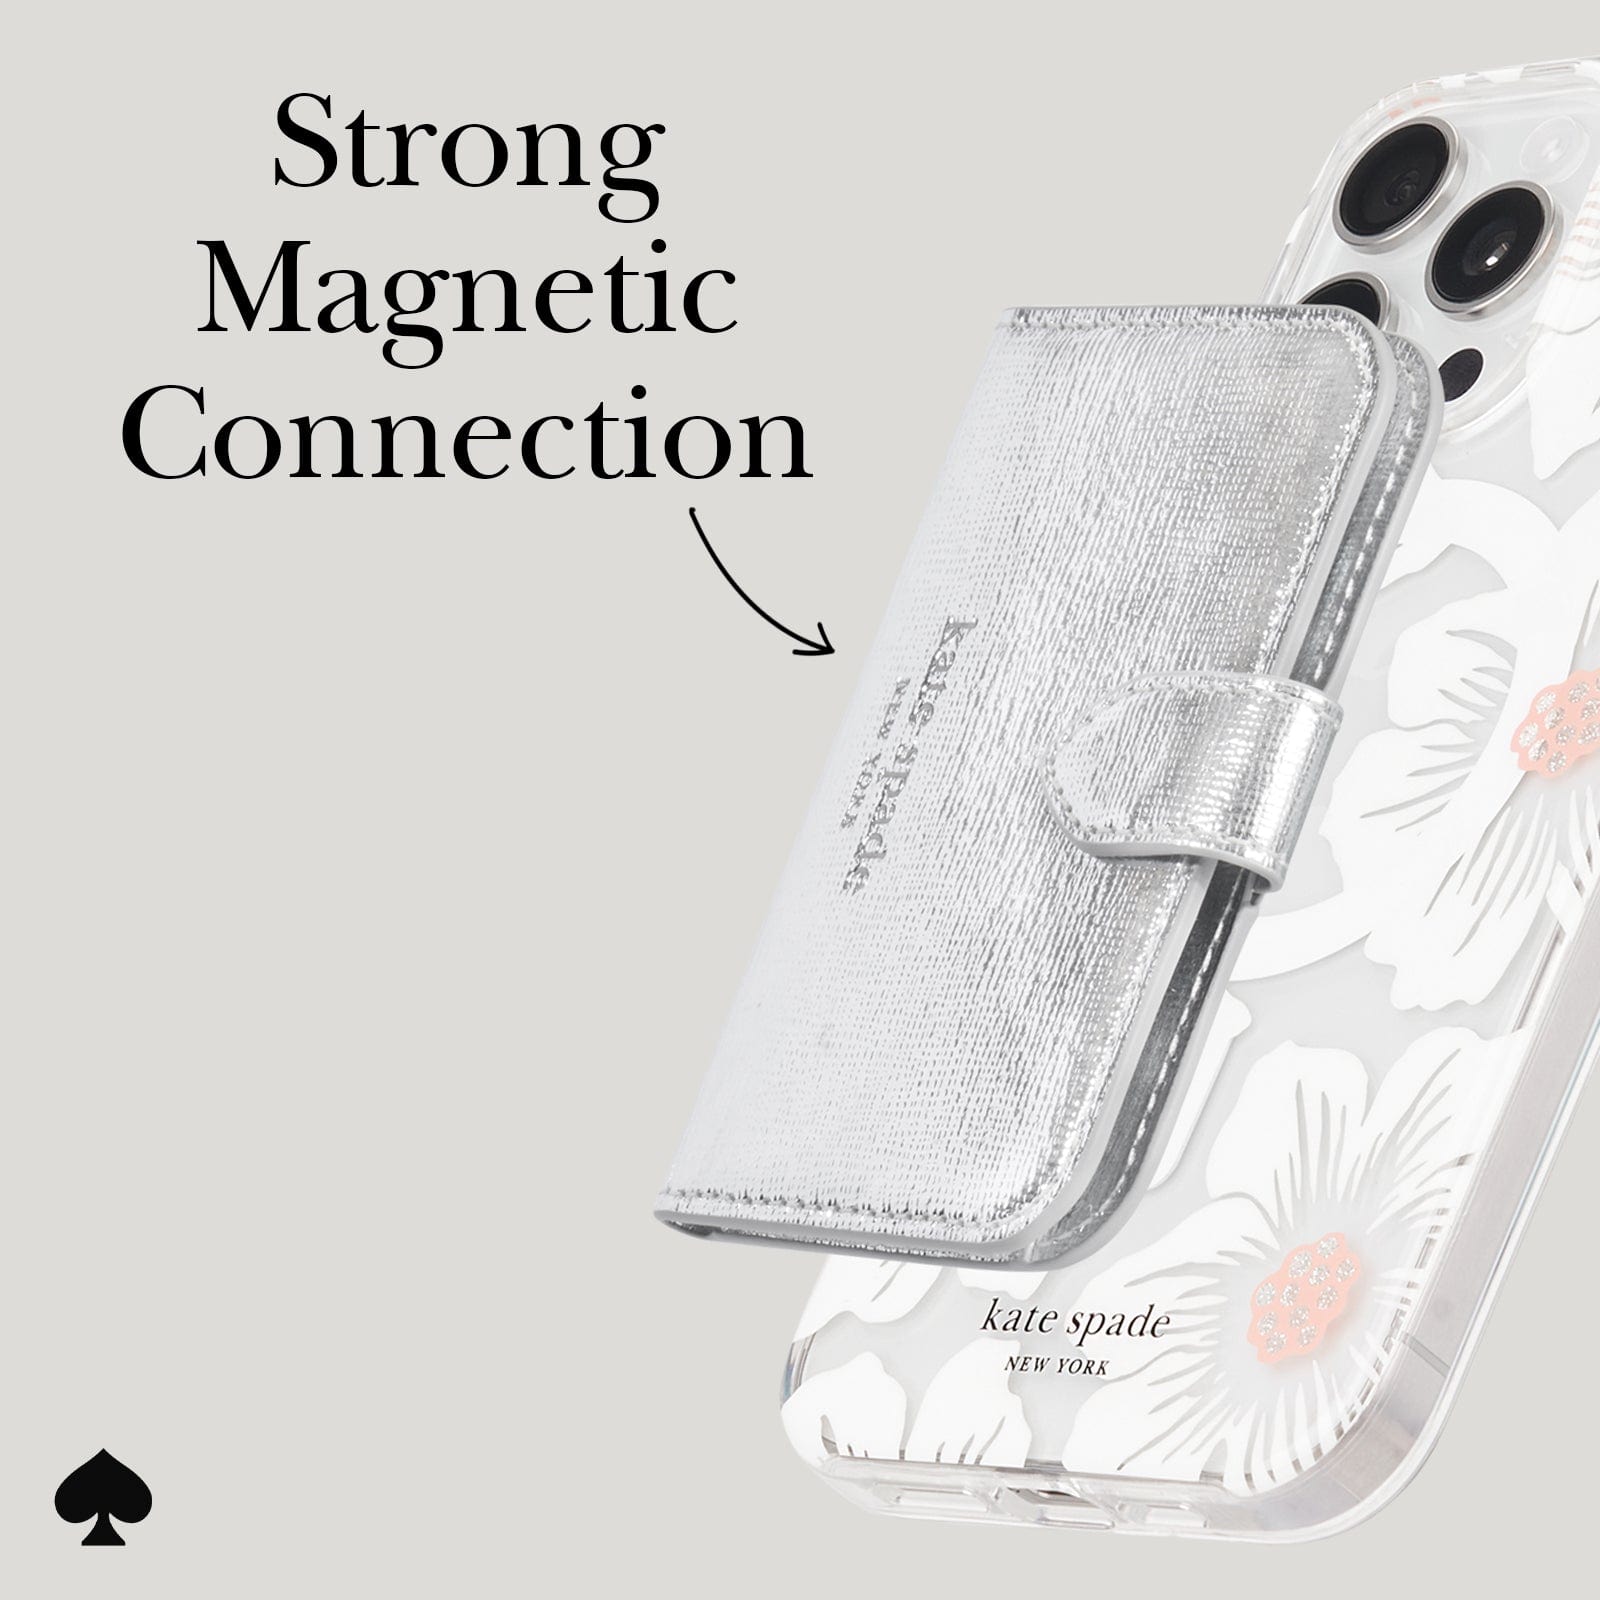 STRONG MAGNETIC CONNECTION